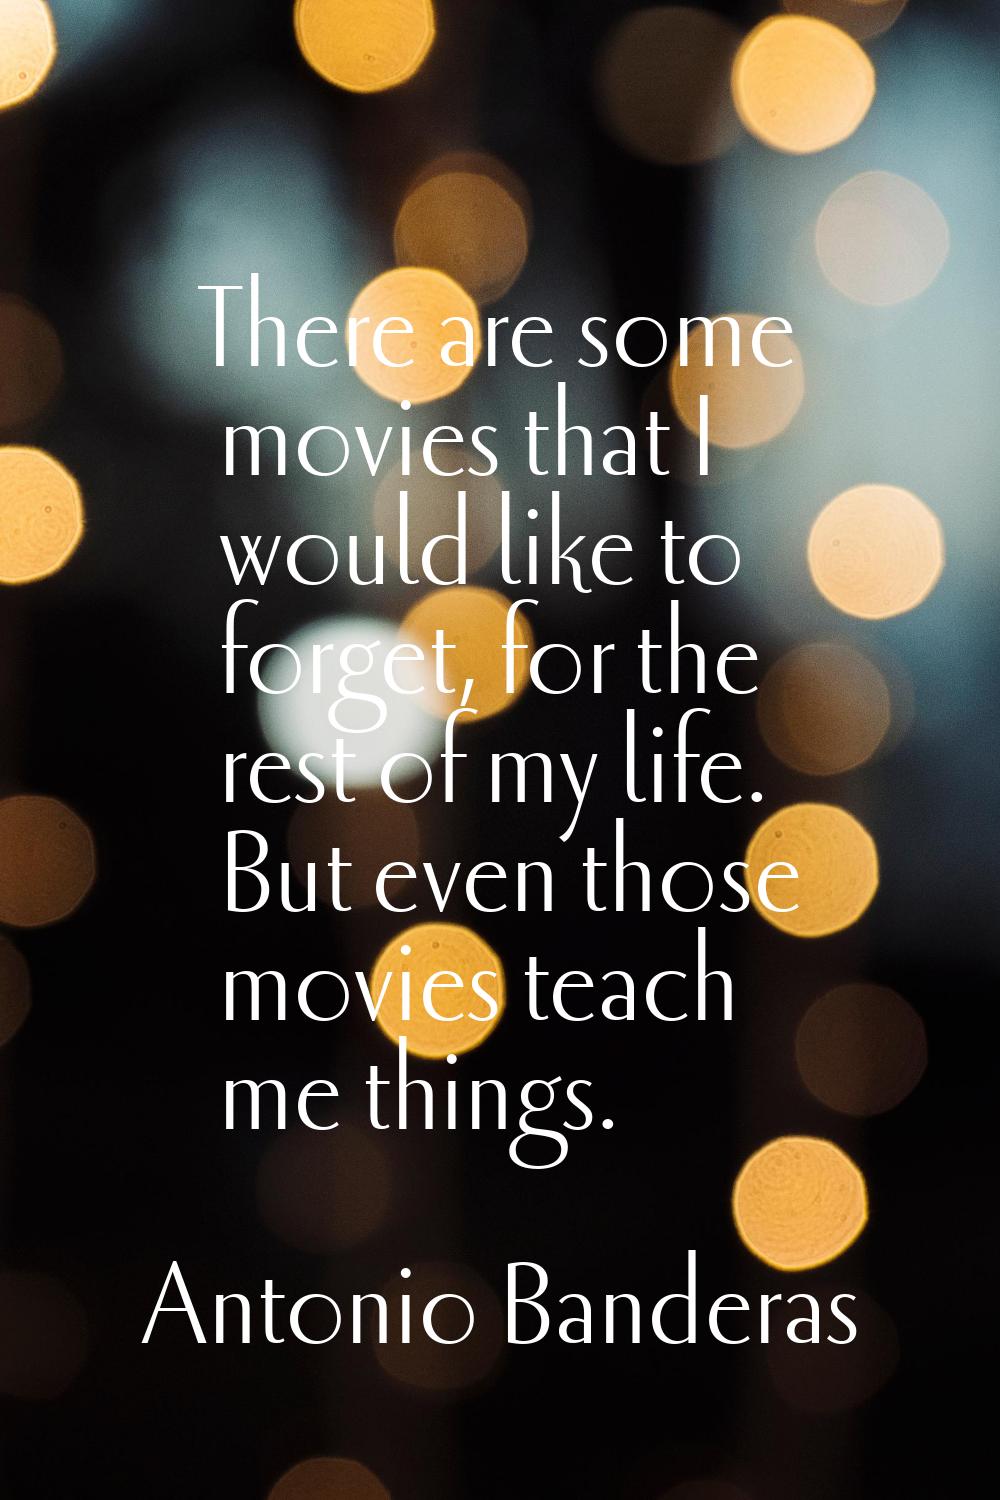 There are some movies that I would like to forget, for the rest of my life. But even those movies t